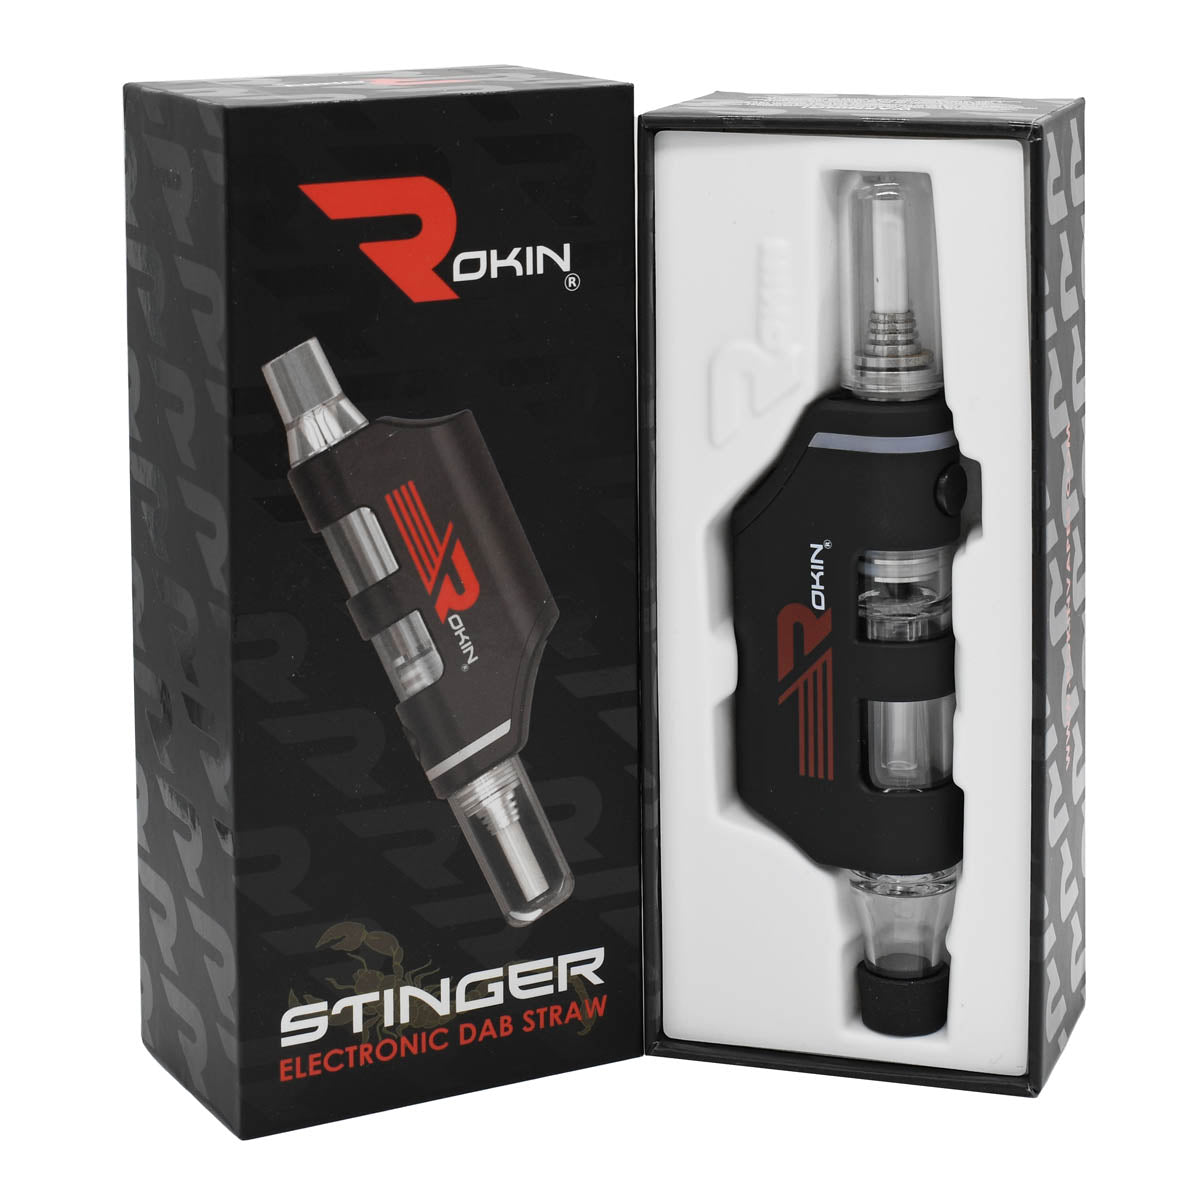 Rokin Stinger electric nectar collector black color option - packing